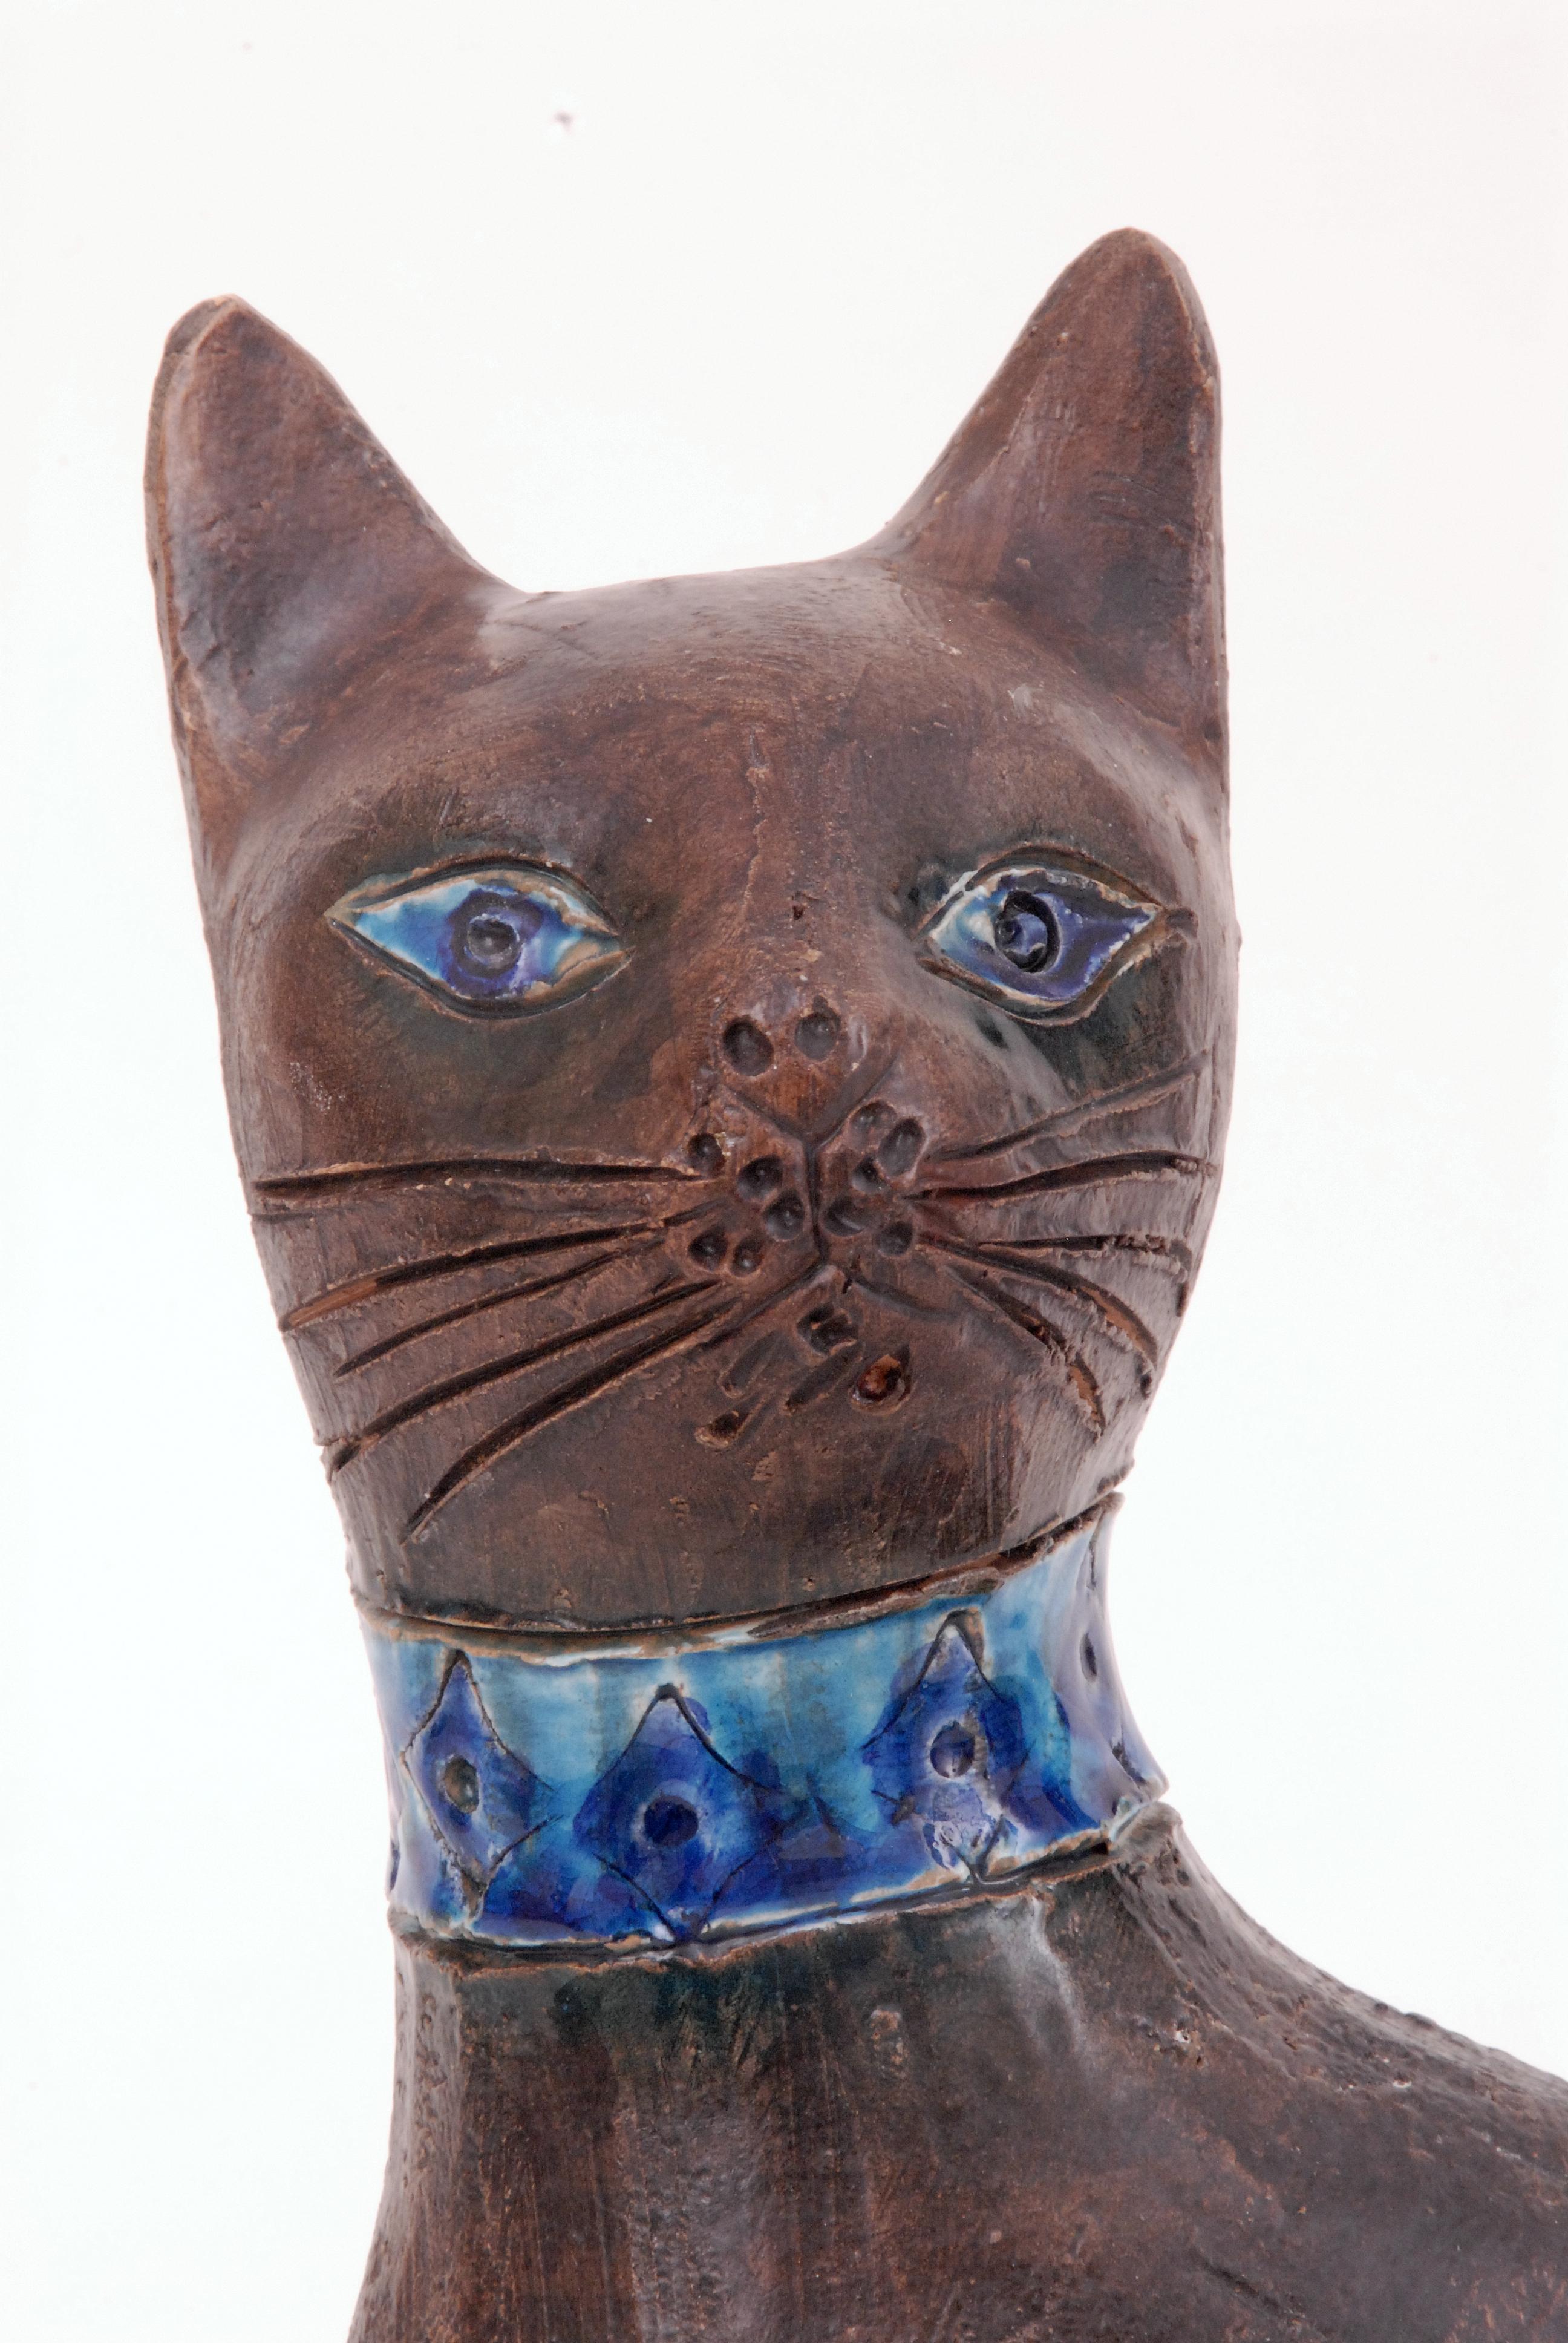 A sitting cat with the Moorish 'Moresco' pattern designed by Aldo Londi in 1963 and produced until circa 1970. Impressed with stylized foliate and diamond motifs and glazed panel and neck collar in blues on a manganese-brown glazed body and head. A